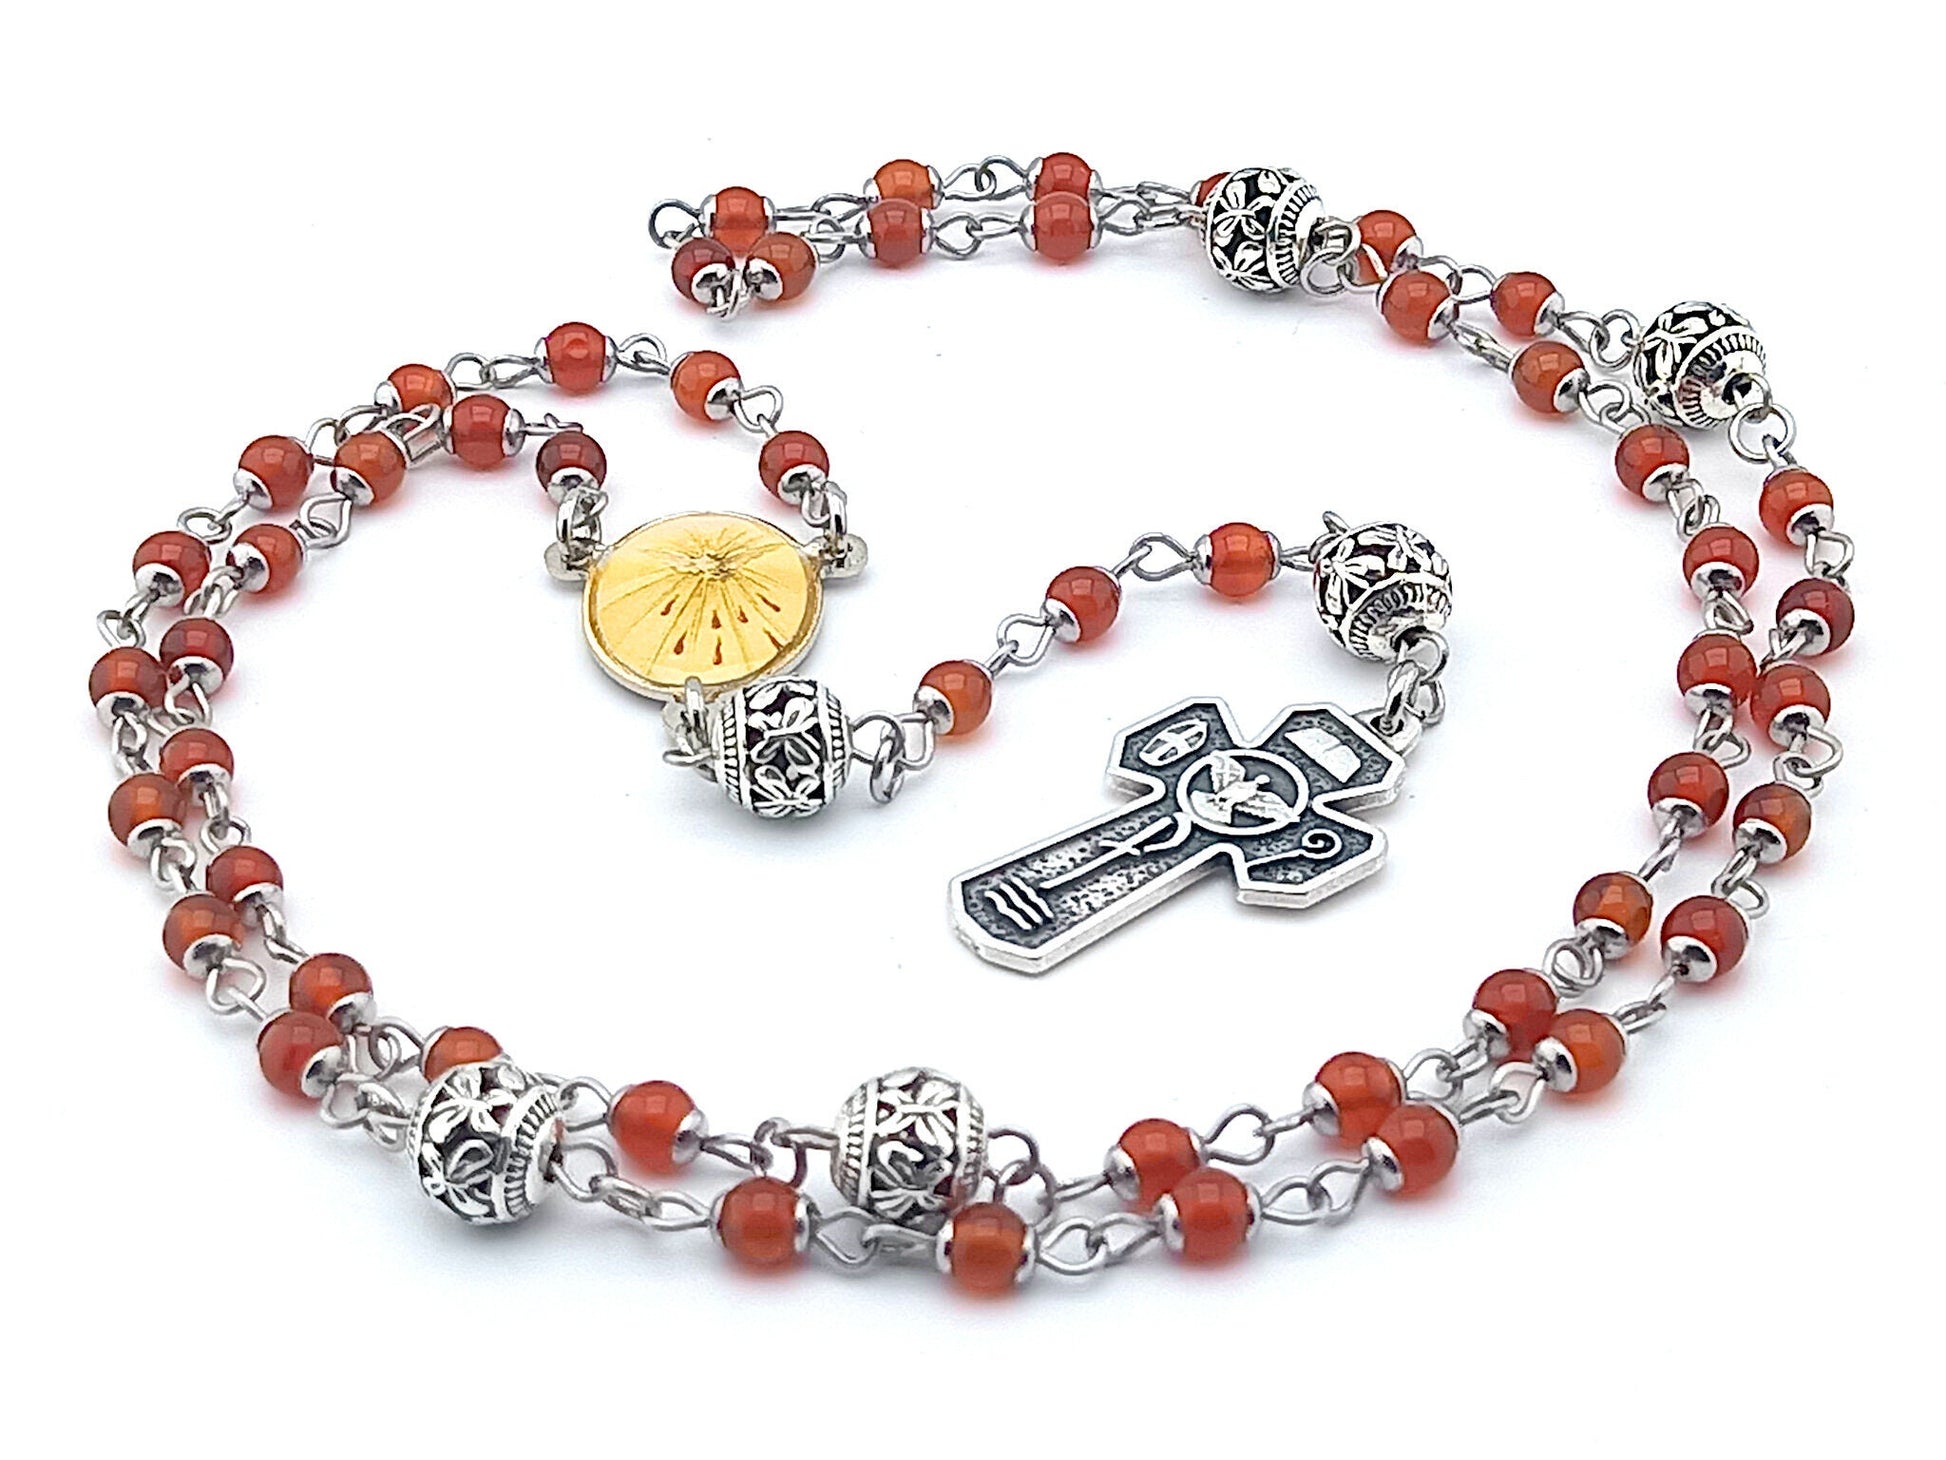 Holy Spirit unique rosary beads miniature rosary with red gemstone and silver beads, Holy Spirit crucifix and centre medal.